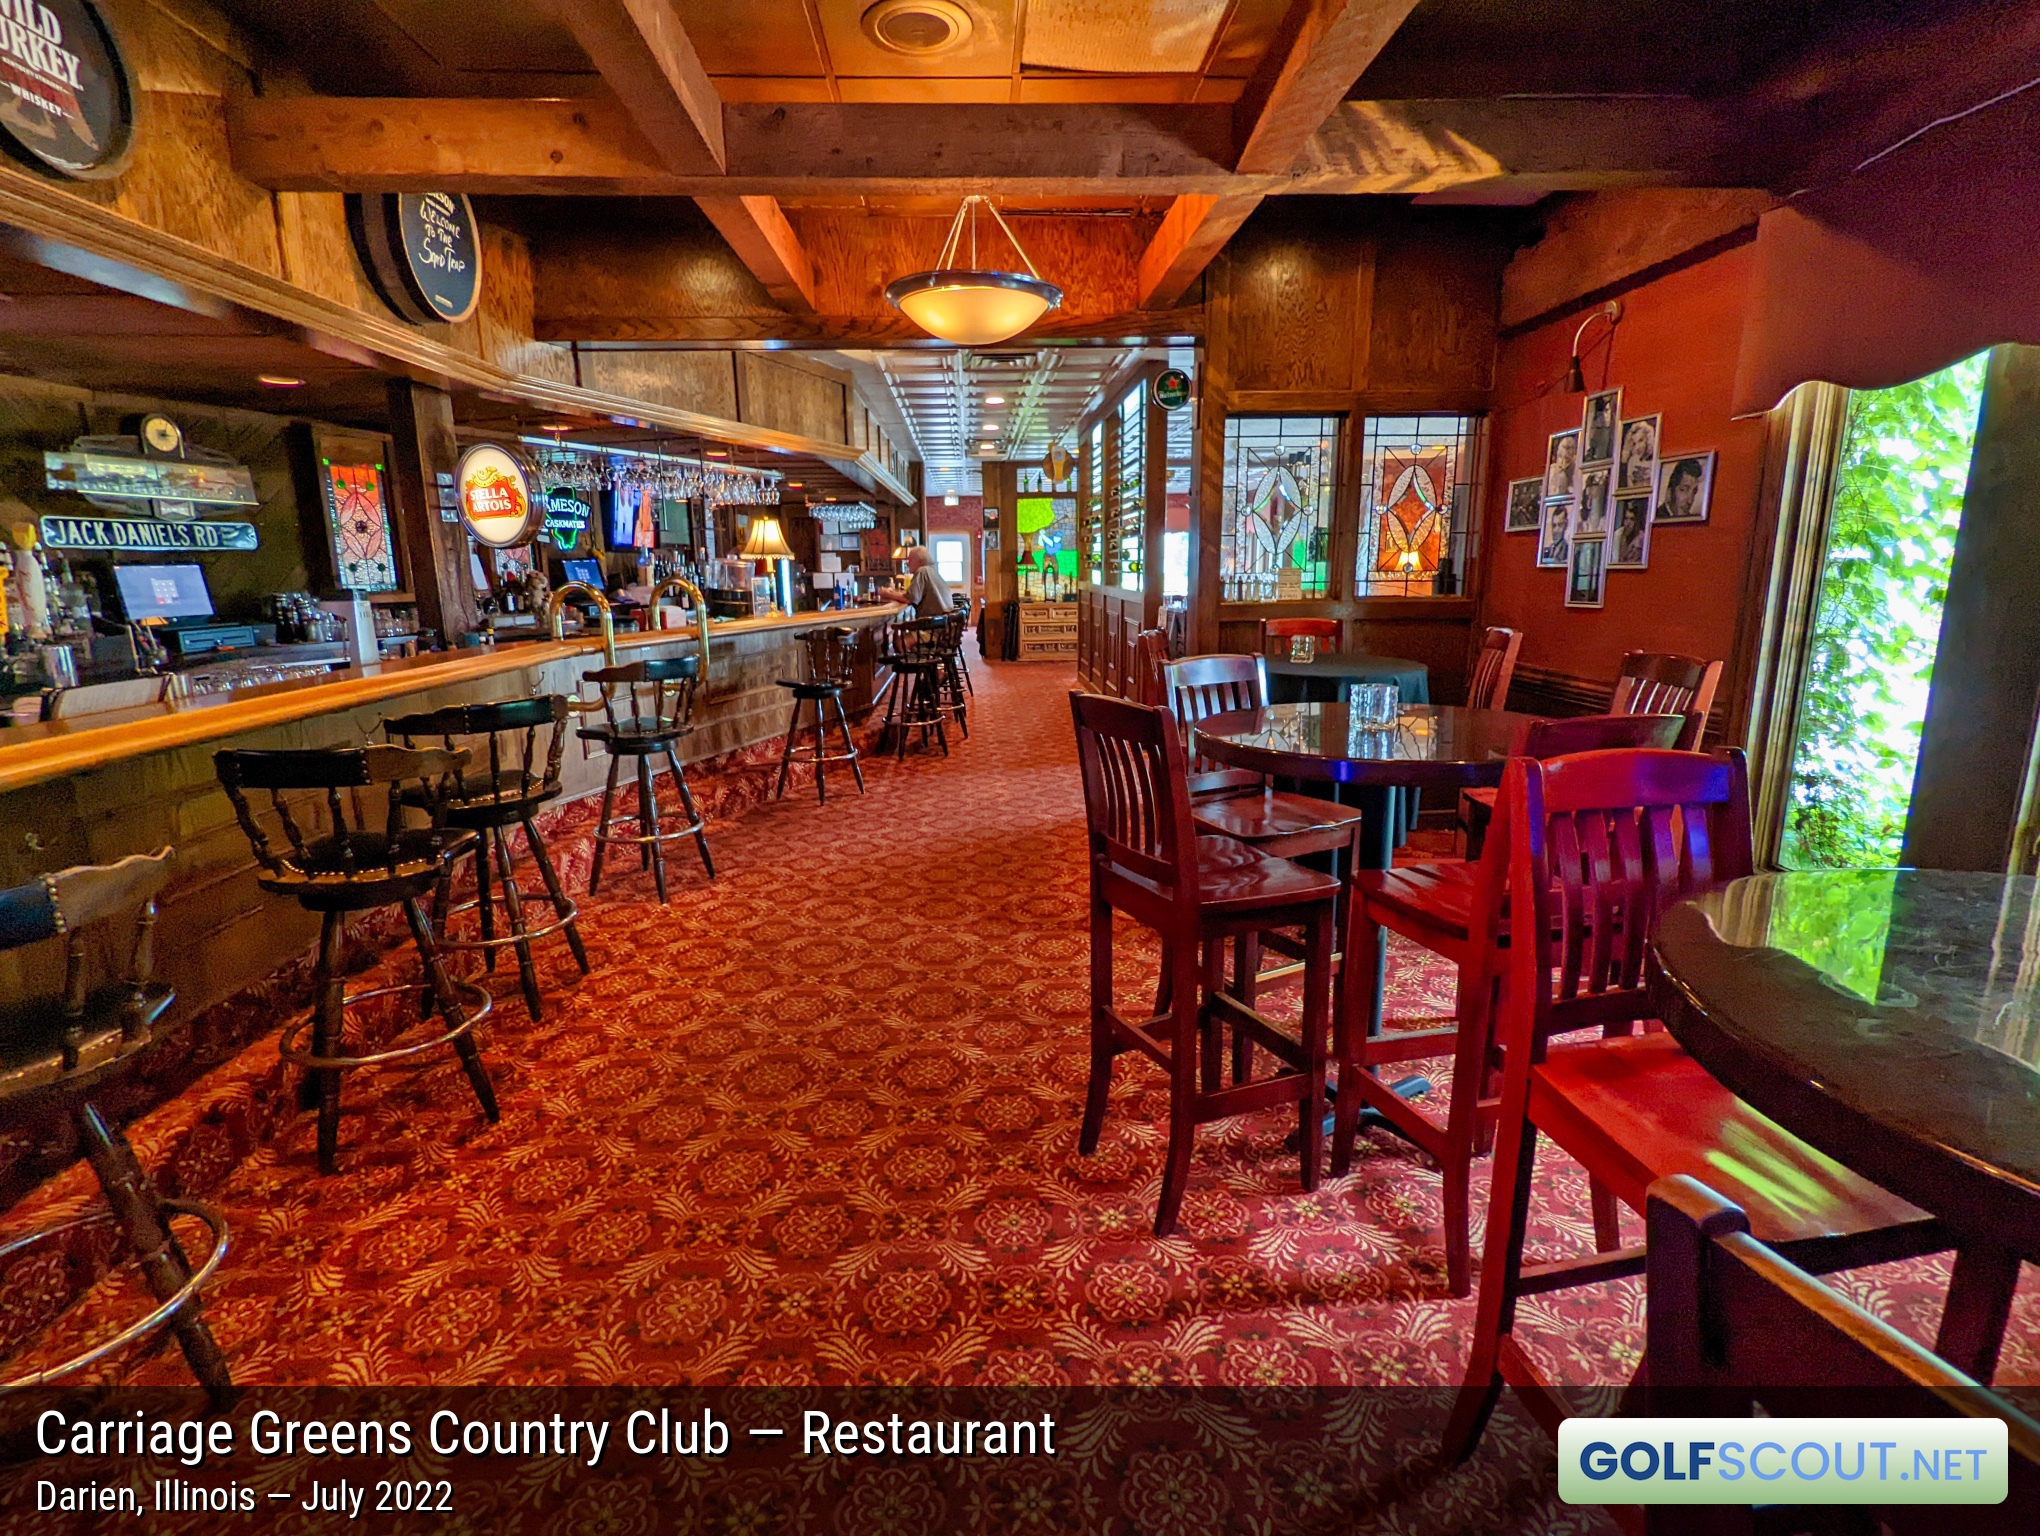 Photo of the restaurant at Carriage Greens Country Club in Darien, Illinois. 